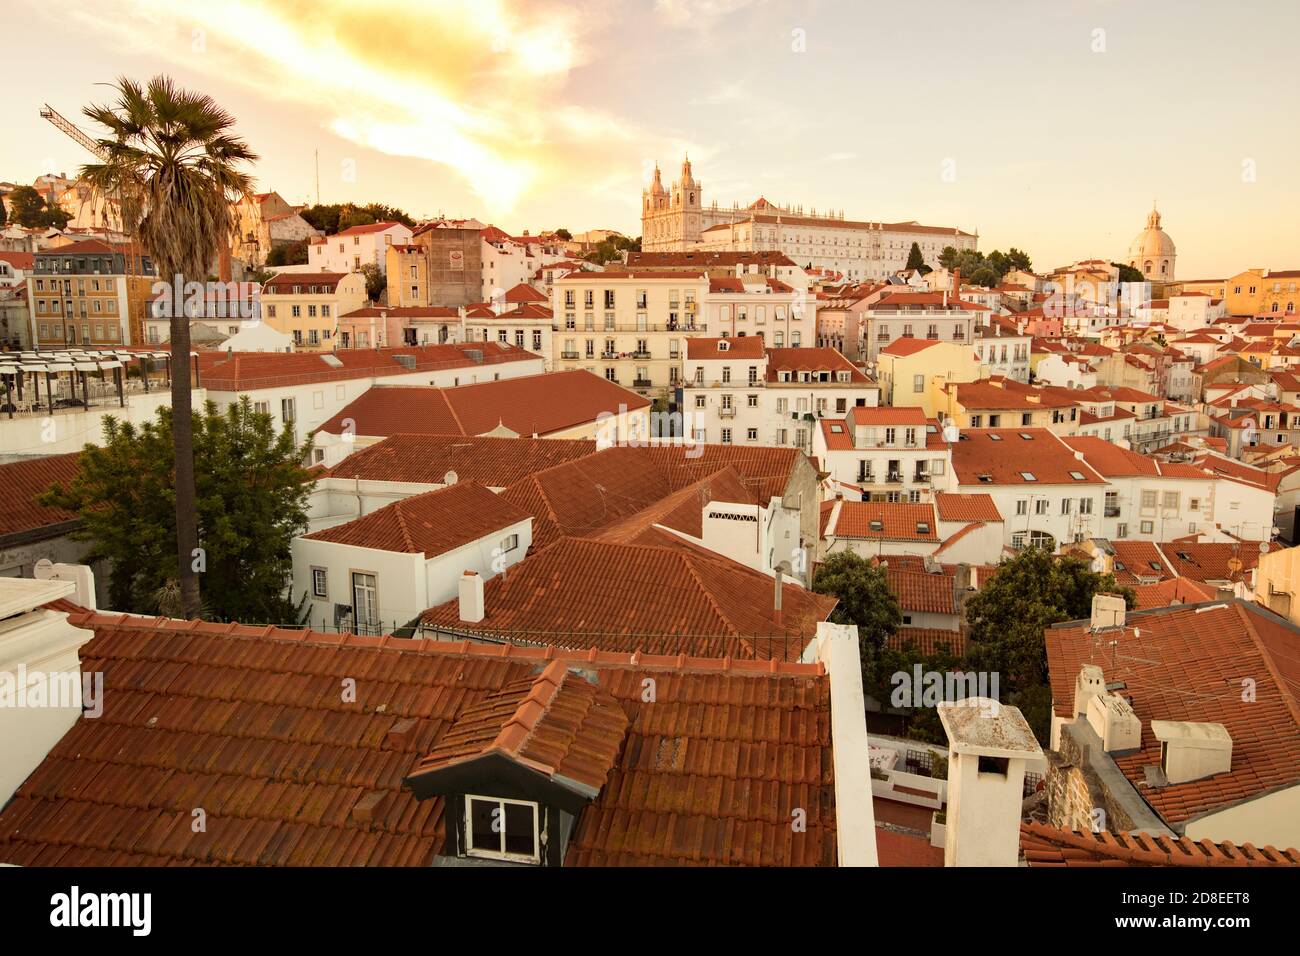 Rooftops and beautiful architecture with the Church of São Miguel in the Alfama neighborhood of Lisbon, Portugal, Europe. Stock Photo